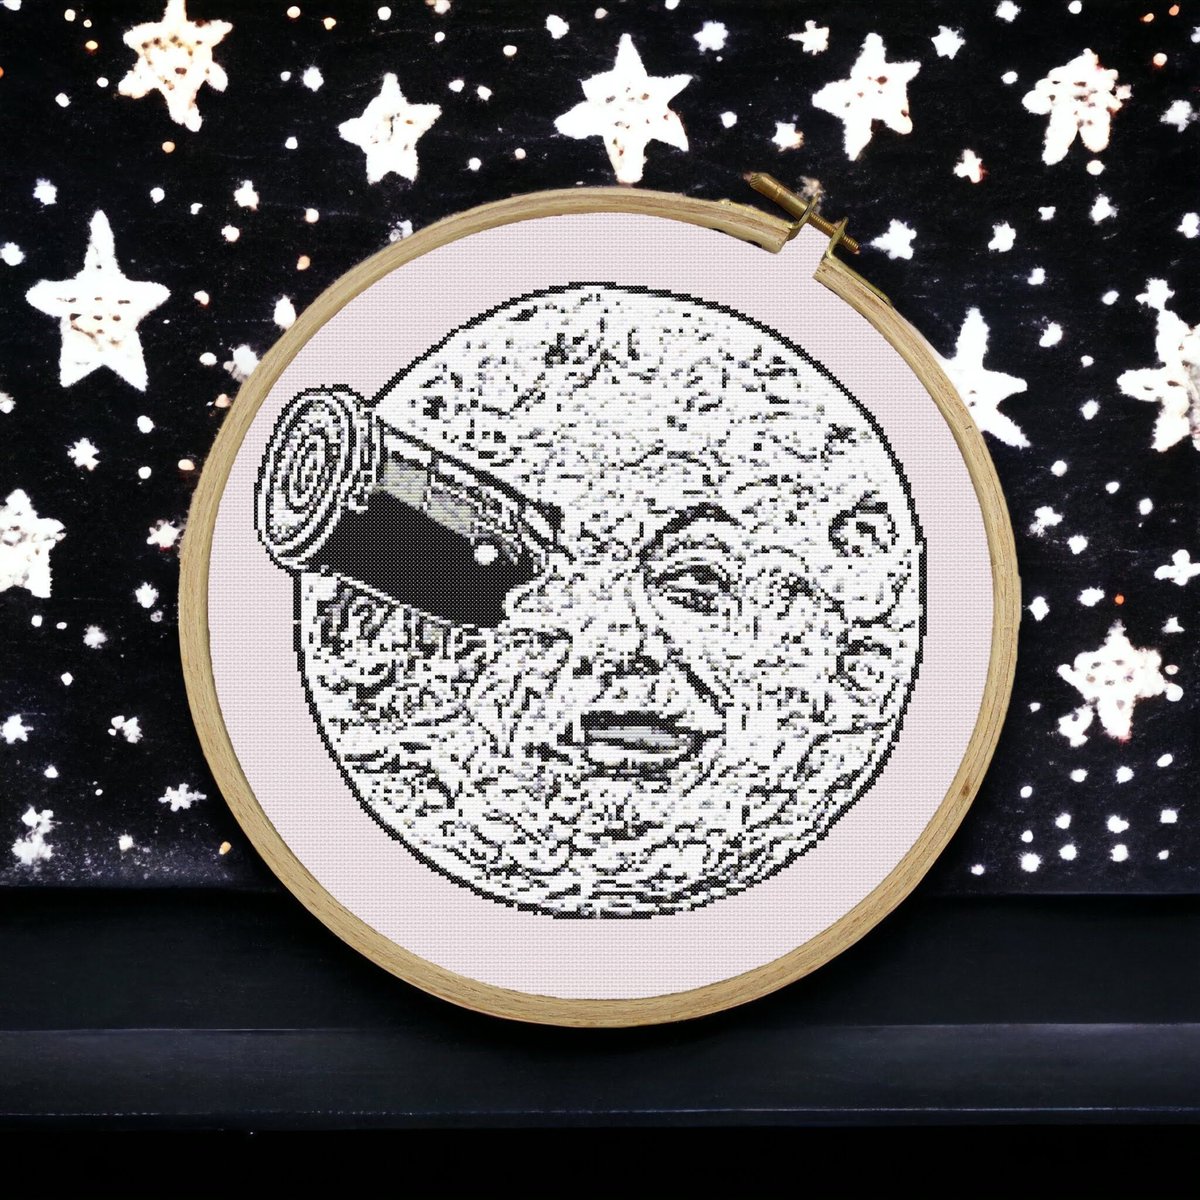 my #etsy shop: A Trip to the Moon Cross Stitch Pattern PDF ONLY - Embroidery Pattern, 197x200, Stitches DIY Film Lover Gift Classic Cinema Cinephile 1920s etsy.me/3WF0kpP #birthday #christmas #crossstitch #crossstitchpattern #pdfpattern #embroiderypattern #cros